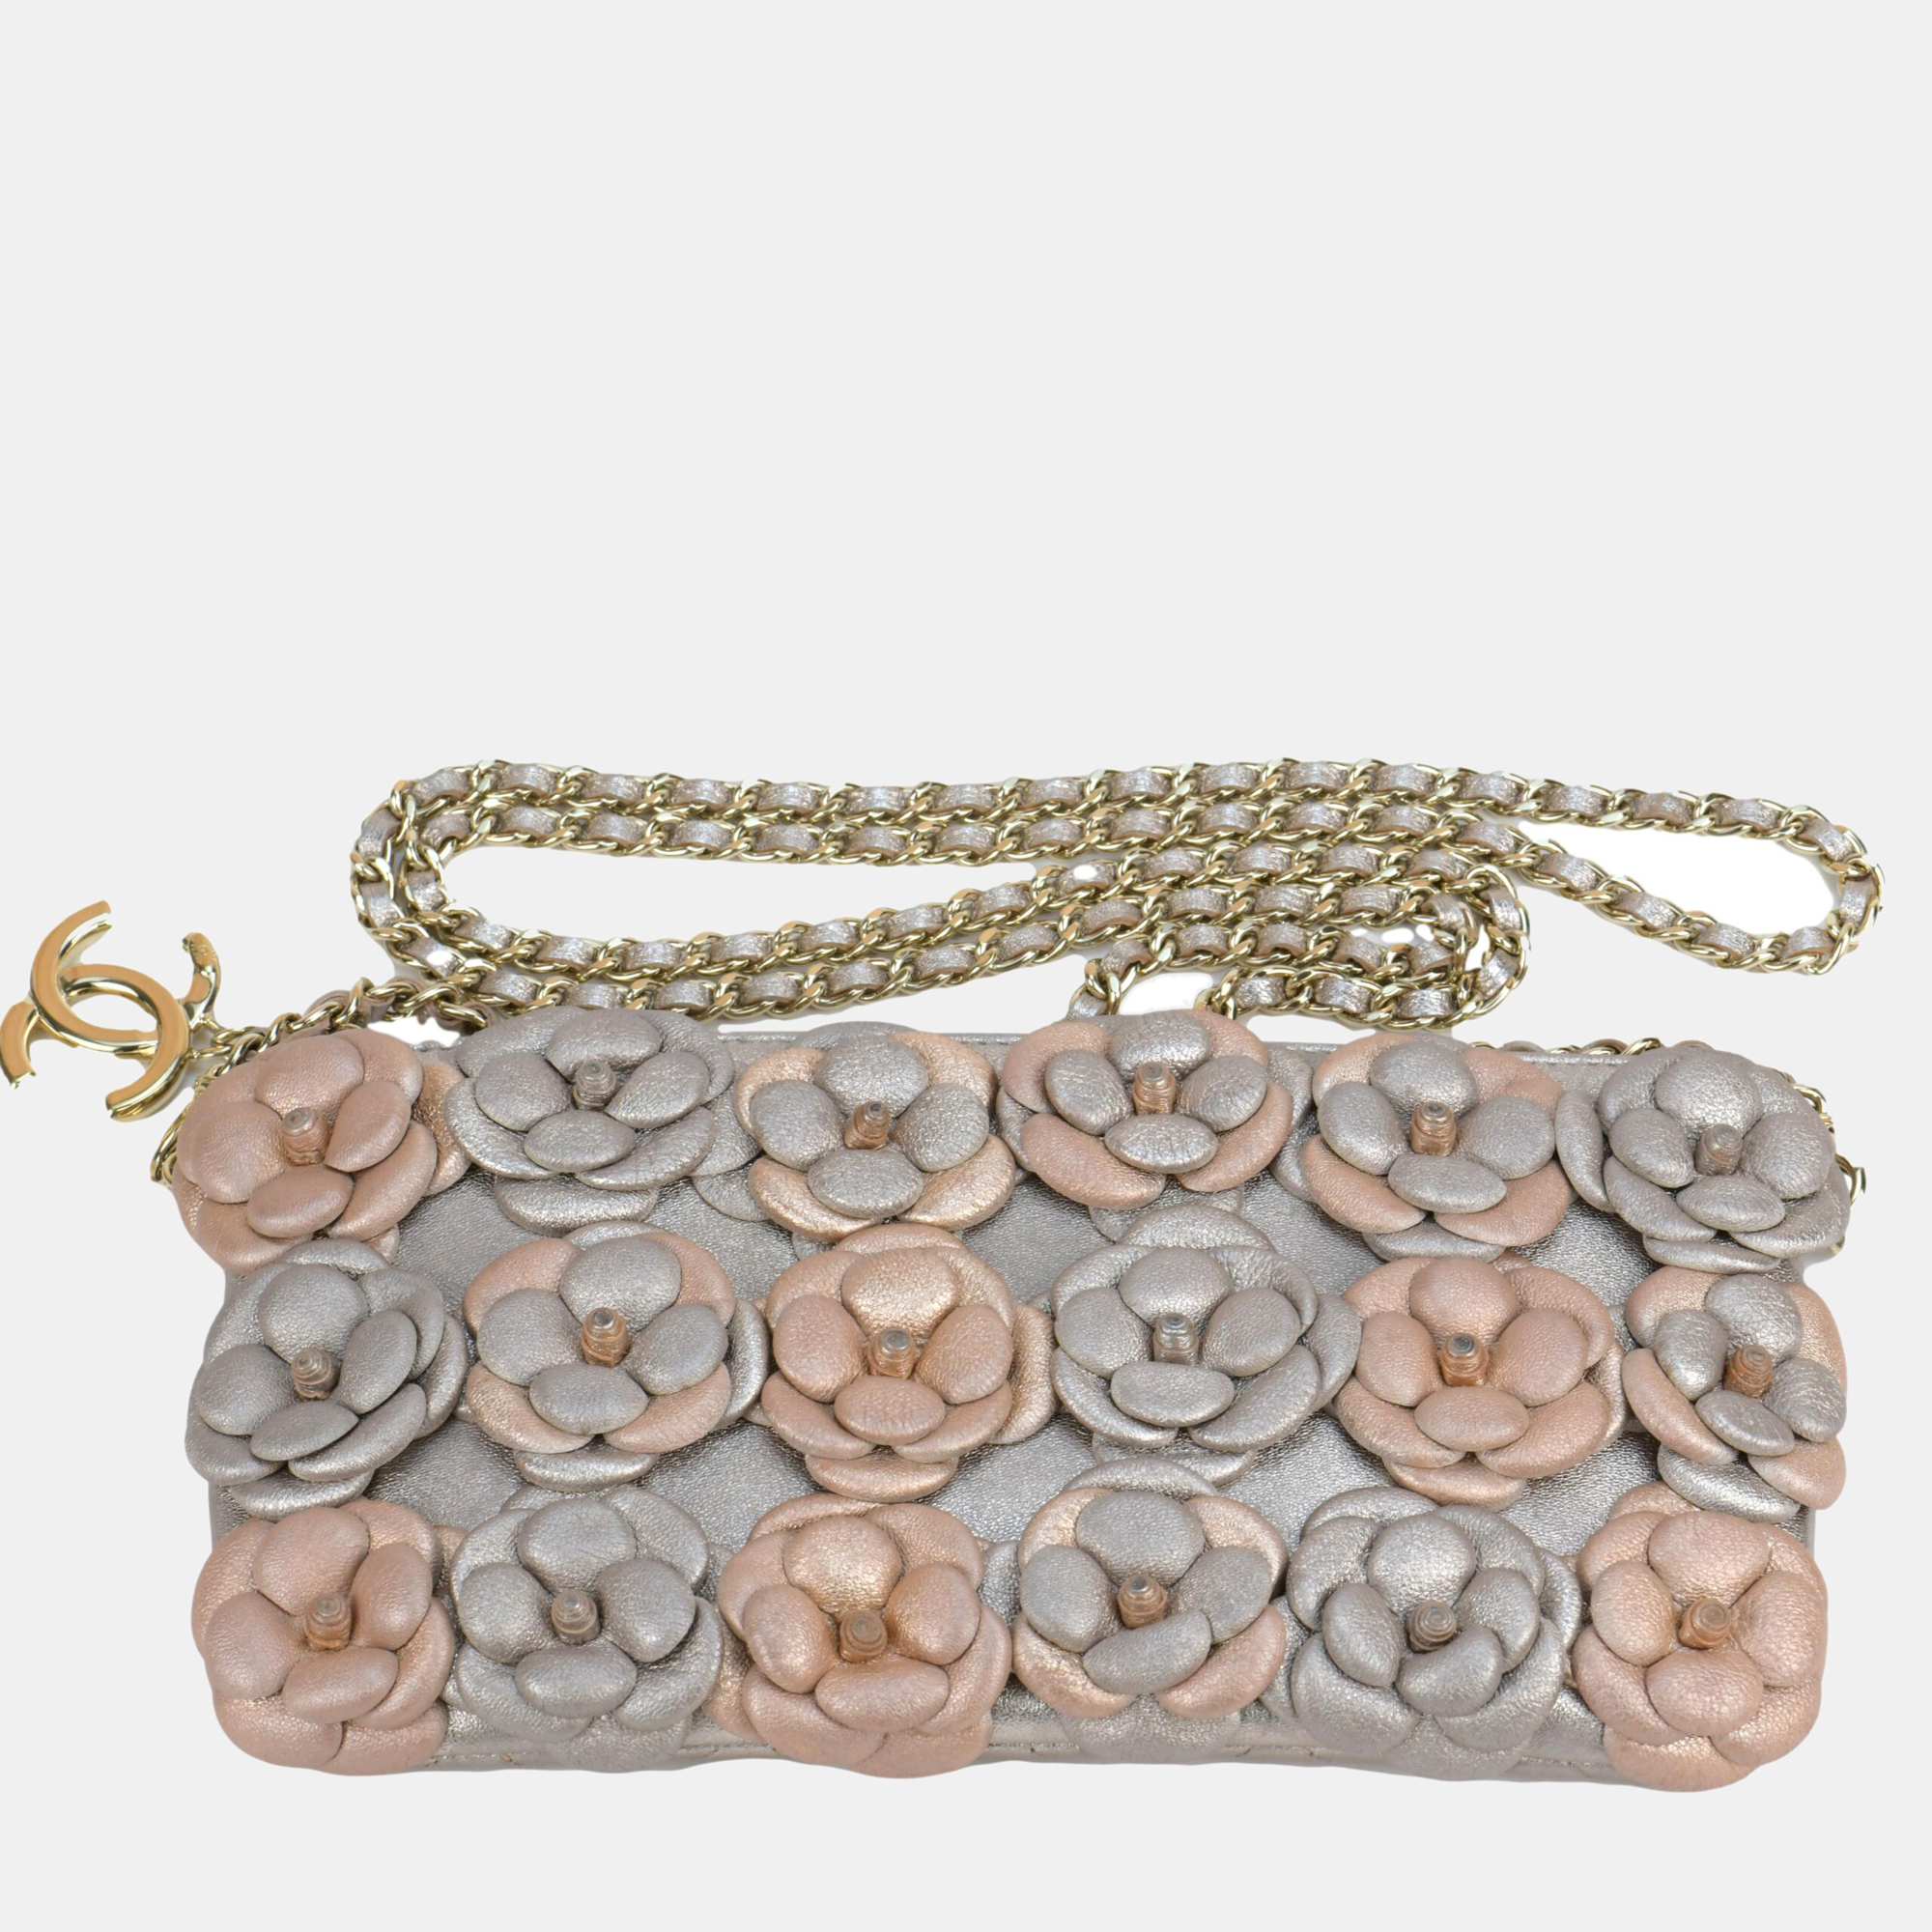 Chanel limited edition camellia embellished lambskin clutch with chain